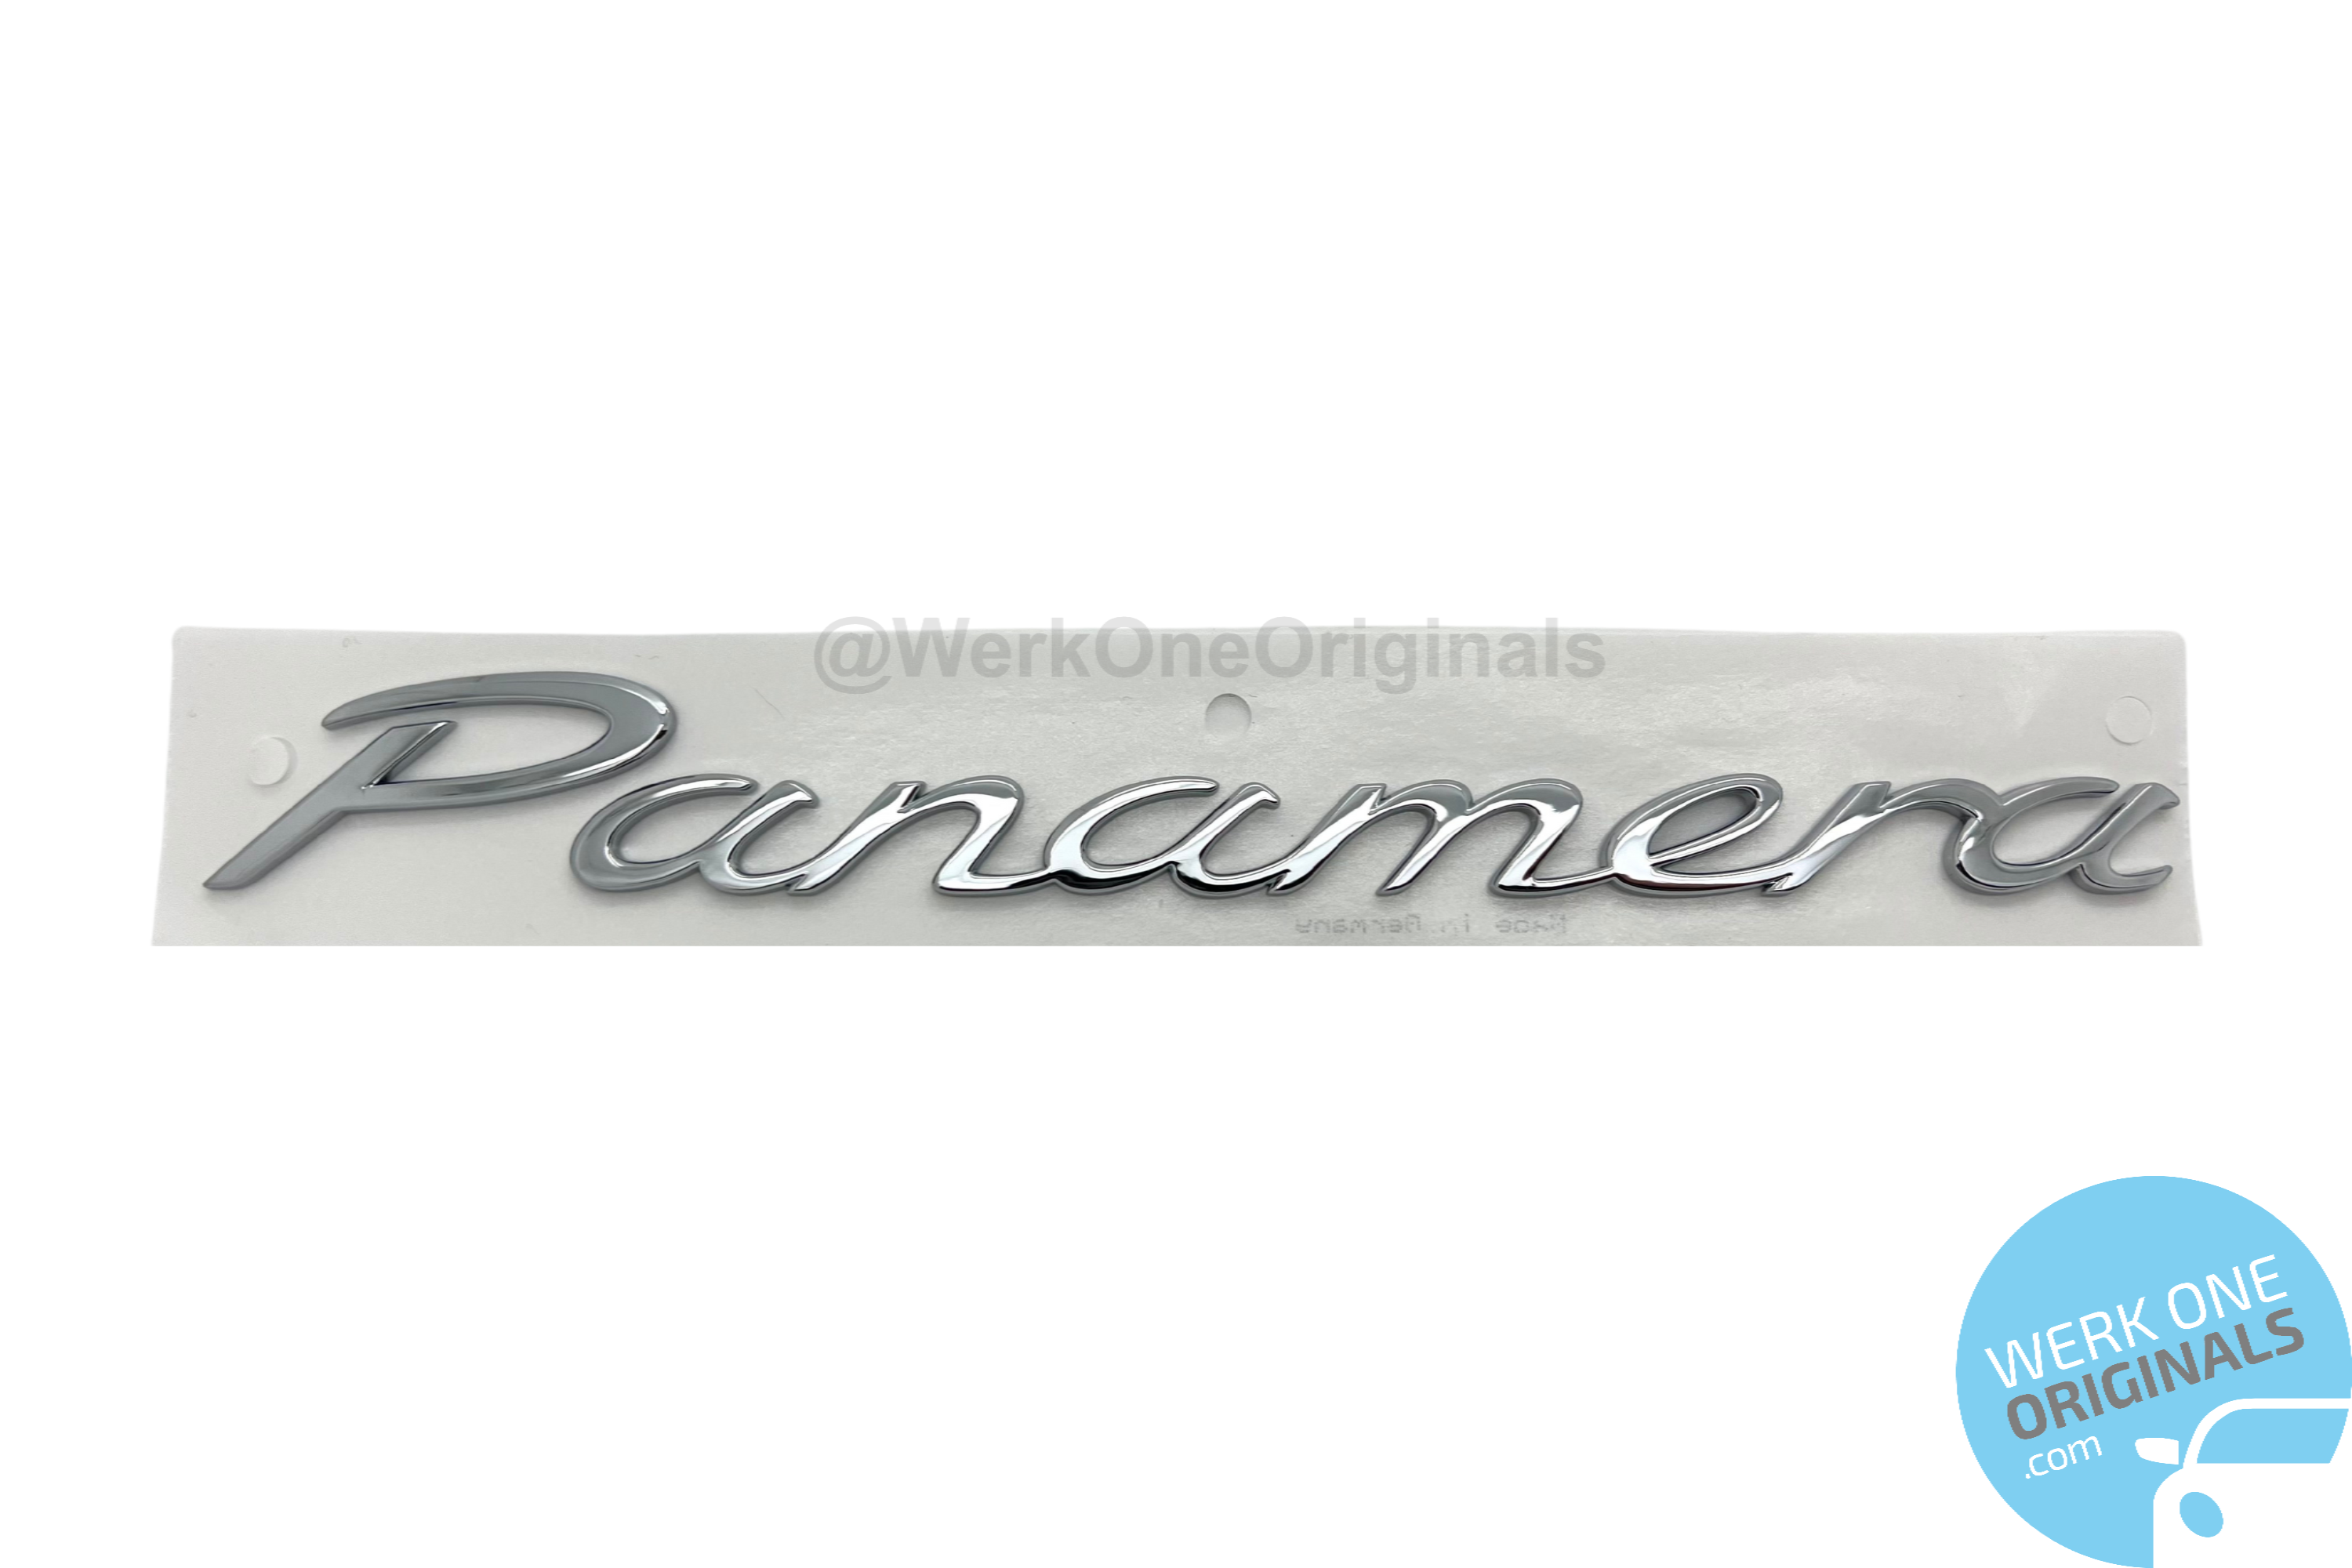 Porsche Official 'Porsche Panamera 4S' Rear Badge Decal in Chrome Silver for Panamera 4S Type 907 & 970 Models